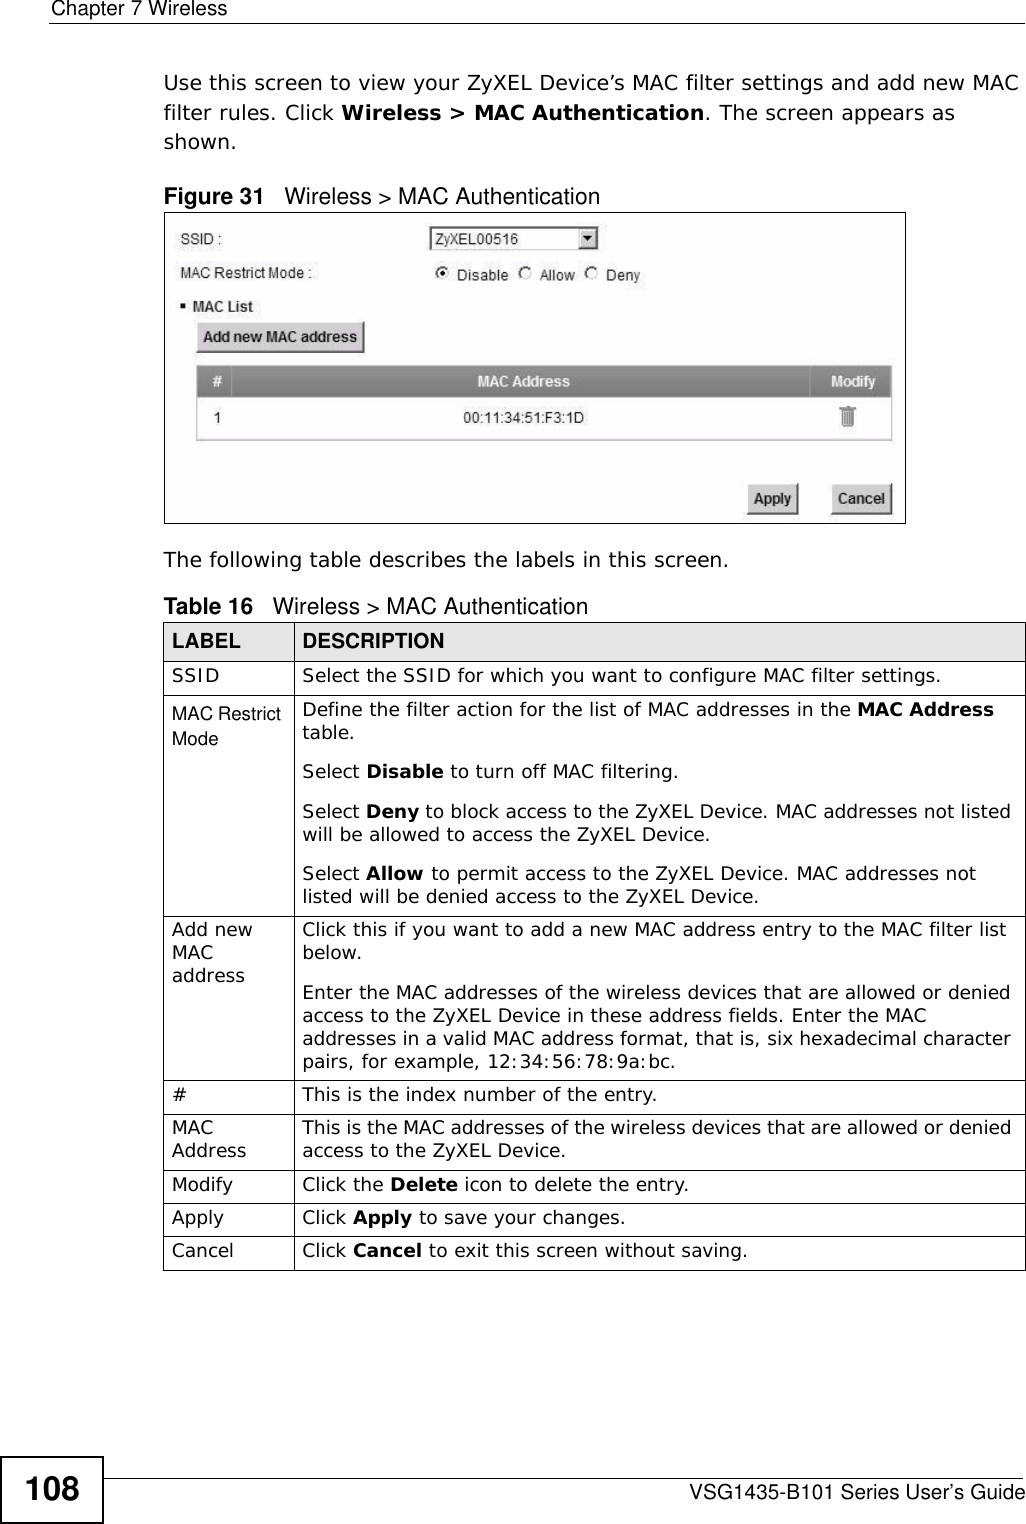 Chapter 7 WirelessVSG1435-B101 Series User’s Guide108Use this screen to view your ZyXEL Device’s MAC filter settings and add new MAC filter rules. Click Wireless &gt; MAC Authentication. The screen appears as shown.Figure 31   Wireless &gt; MAC AuthenticationThe following table describes the labels in this screen.Table 16   Wireless &gt; MAC AuthenticationLABEL DESCRIPTIONSSID Select the SSID for which you want to configure MAC filter settings.MAC Restrict Mode Define the filter action for the list of MAC addresses in the MAC Address table. Select Disable to turn off MAC filtering.Select Deny to block access to the ZyXEL Device. MAC addresses not listed will be allowed to access the ZyXEL Device. Select Allow to permit access to the ZyXEL Device. MAC addresses not listed will be denied access to the ZyXEL Device. Add new MAC addressClick this if you want to add a new MAC address entry to the MAC filter list below.Enter the MAC addresses of the wireless devices that are allowed or denied access to the ZyXEL Device in these address fields. Enter the MAC addresses in a valid MAC address format, that is, six hexadecimal character pairs, for example, 12:34:56:78:9a:bc.#This is the index number of the entry.MAC Address This is the MAC addresses of the wireless devices that are allowed or denied access to the ZyXEL Device.Modify Click the Delete icon to delete the entry.Apply Click Apply to save your changes.Cancel Click Cancel to exit this screen without saving.